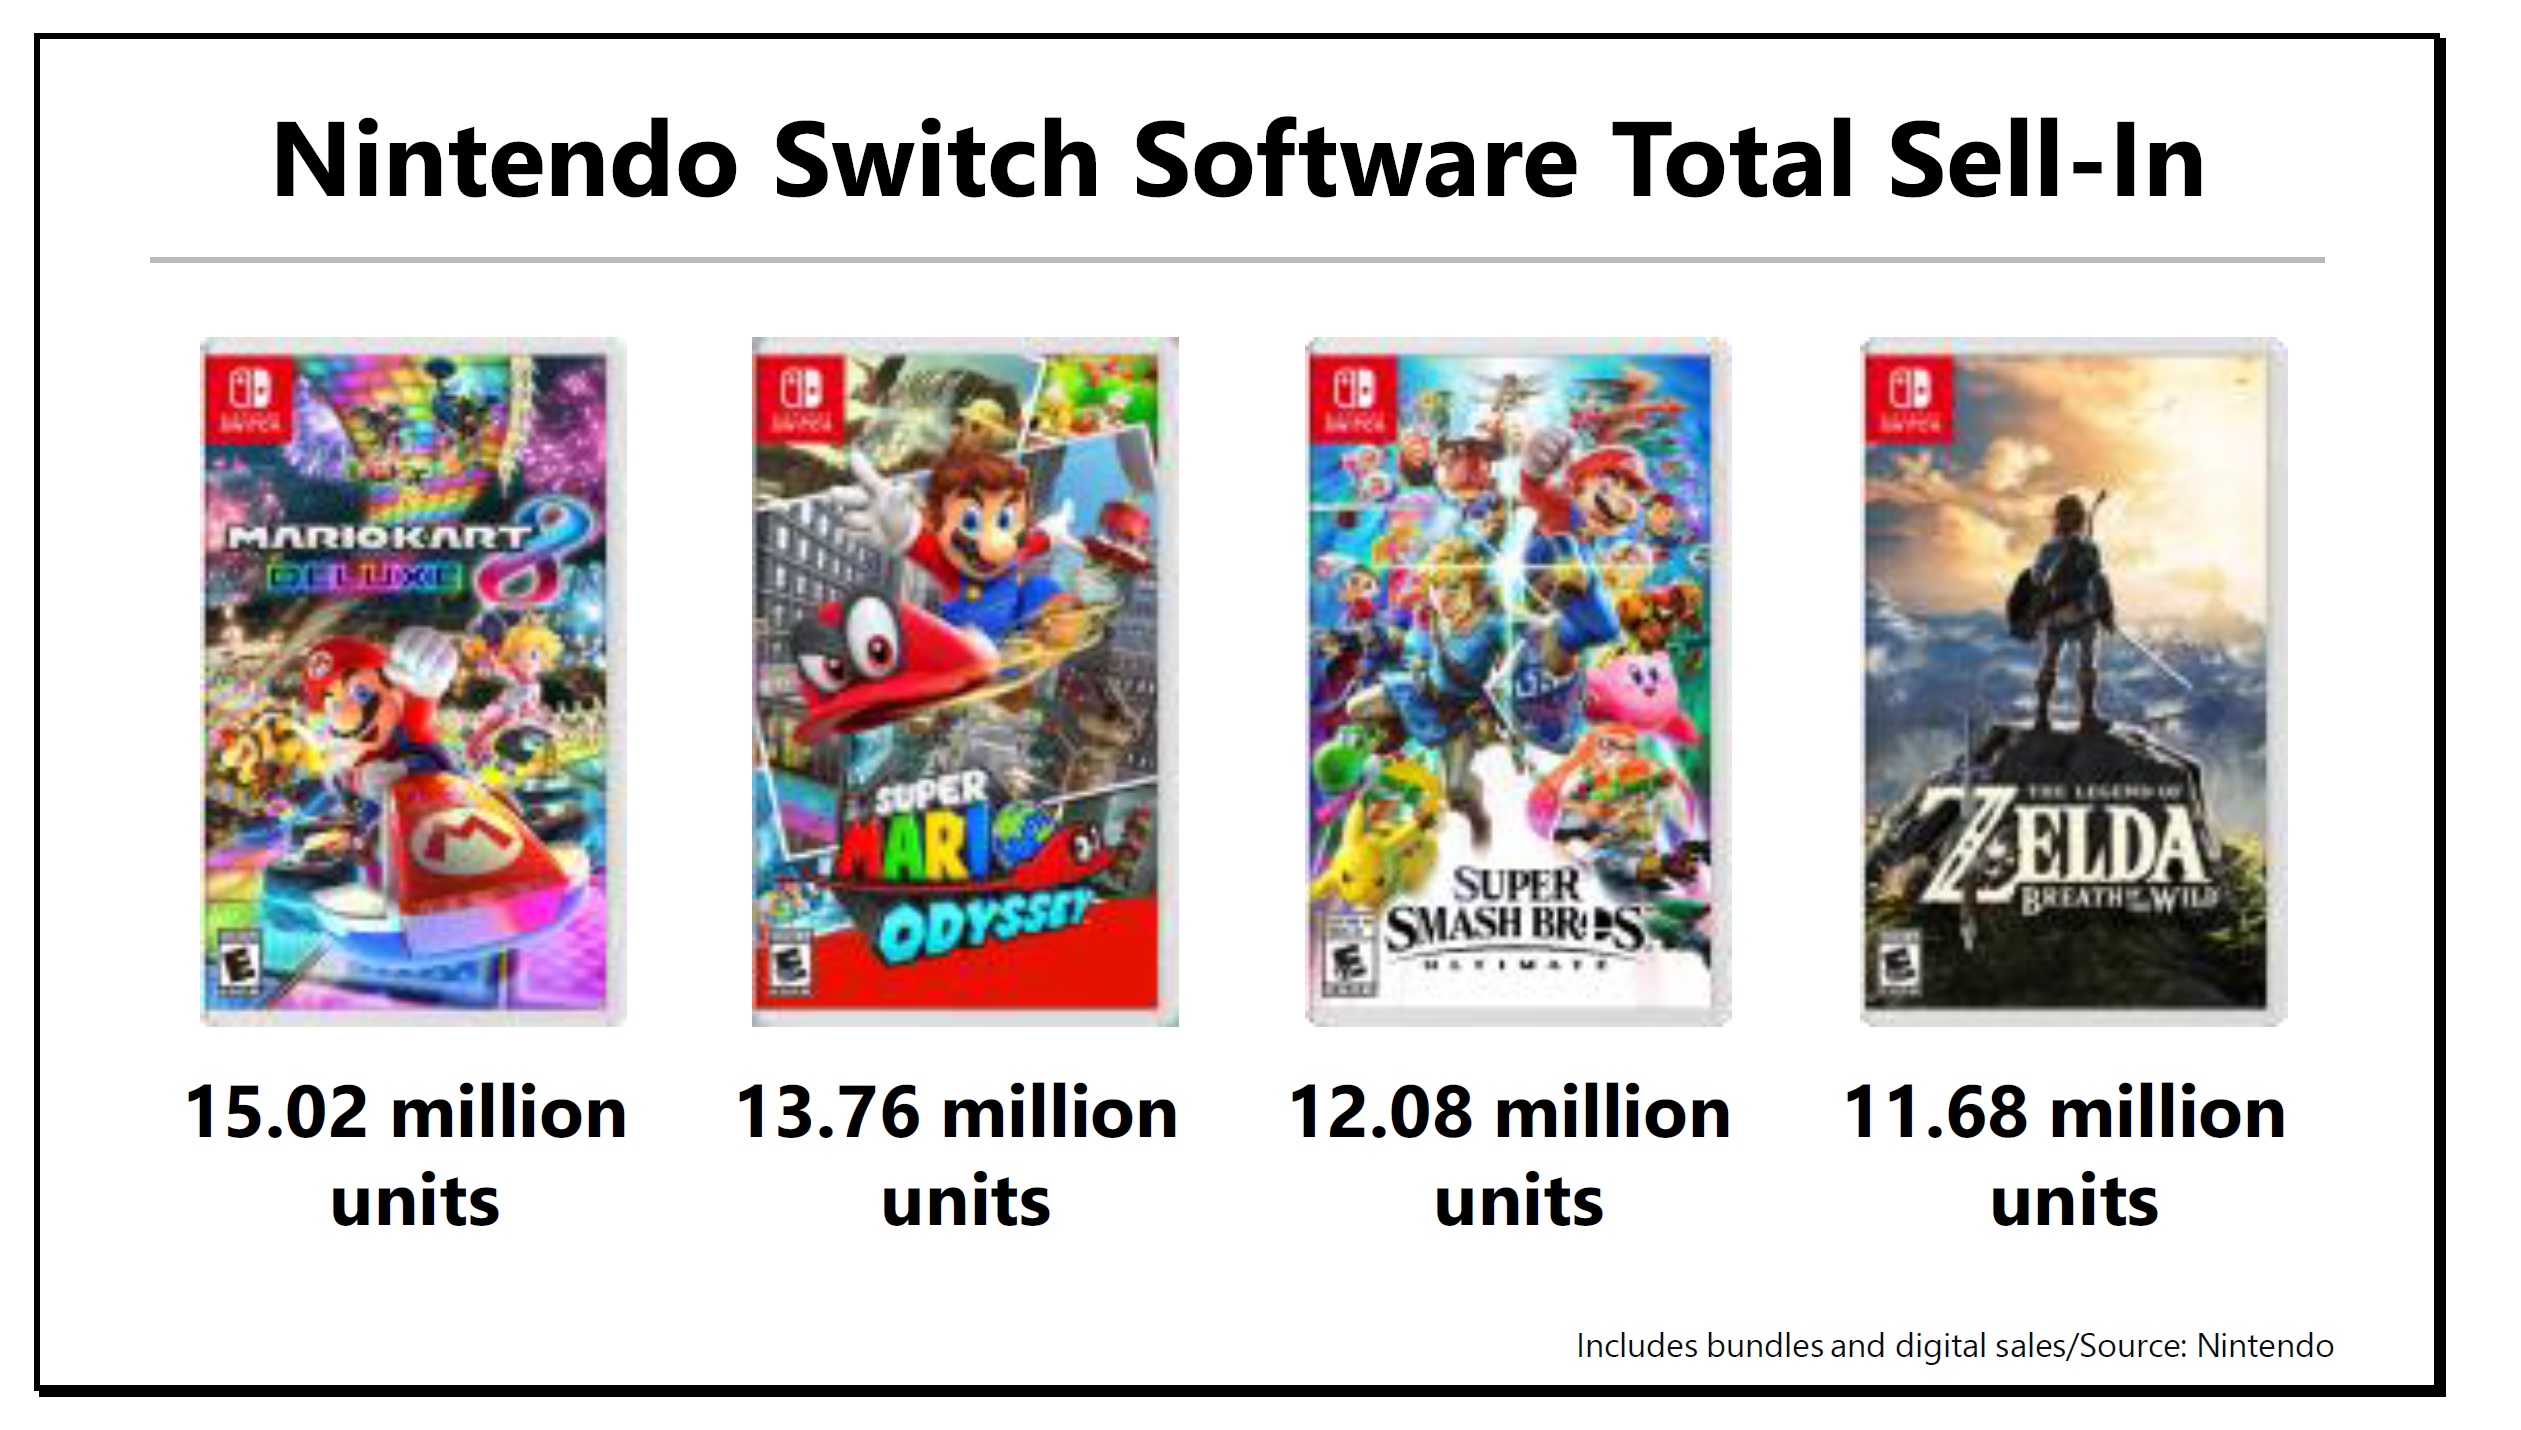 Nintendo on its bestselling Switch games